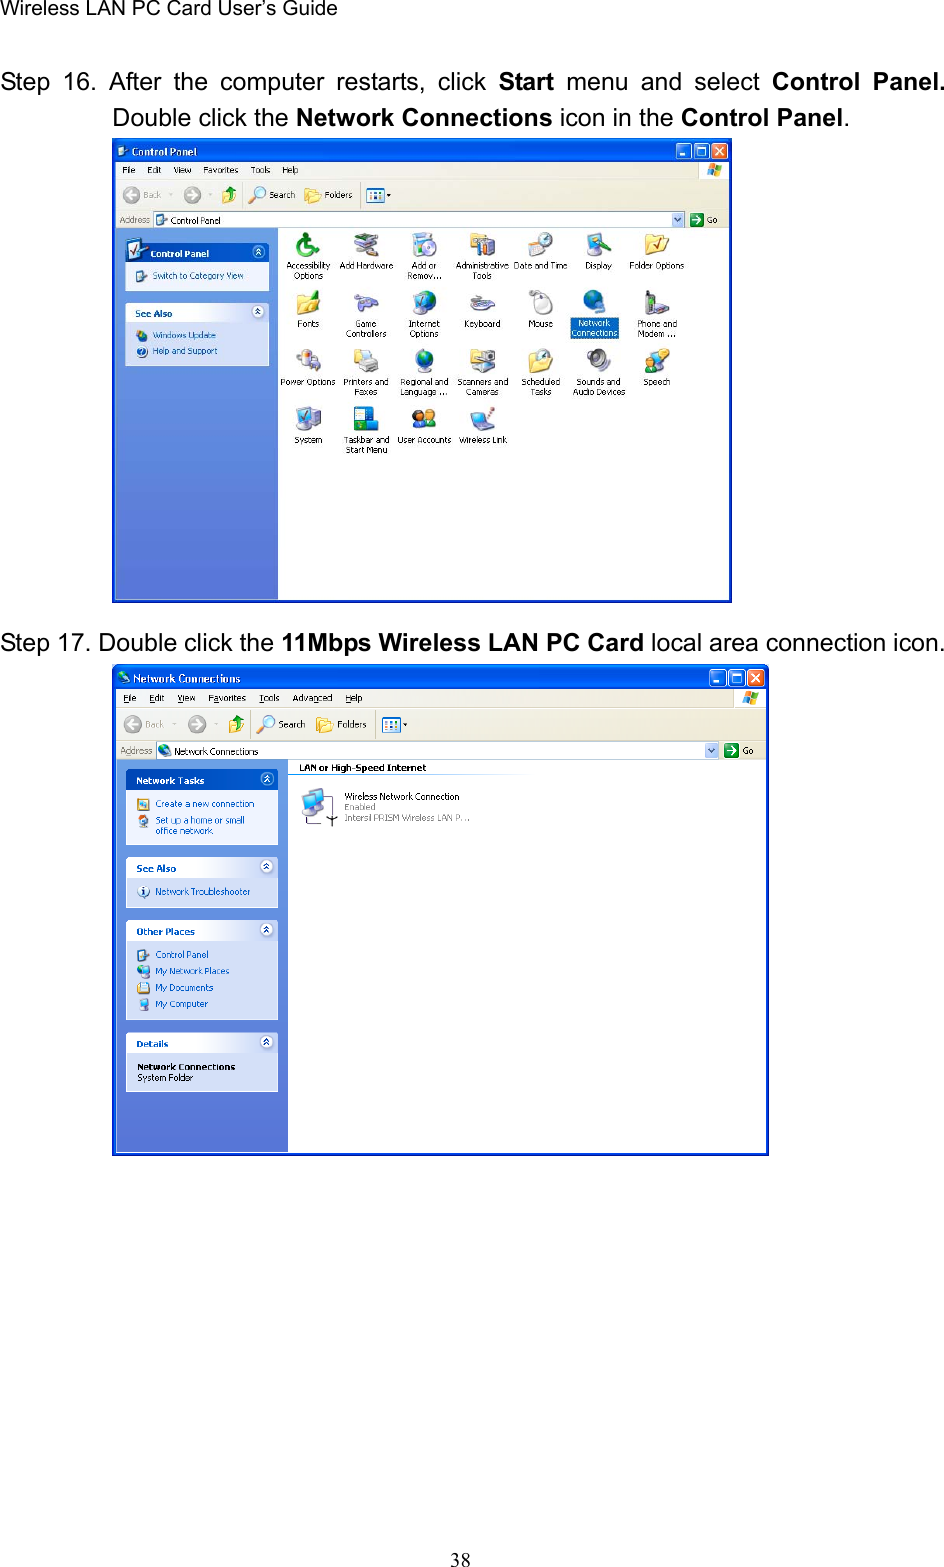 Wireless LAN PC Card User’s Guide38Step 16. After the computer restarts, click Start menu and select Control Panel.Double click the Network Connections icon in the Control Panel.Step 17. Double click the 11Mbps Wireless LAN PC Card local area connection icon.